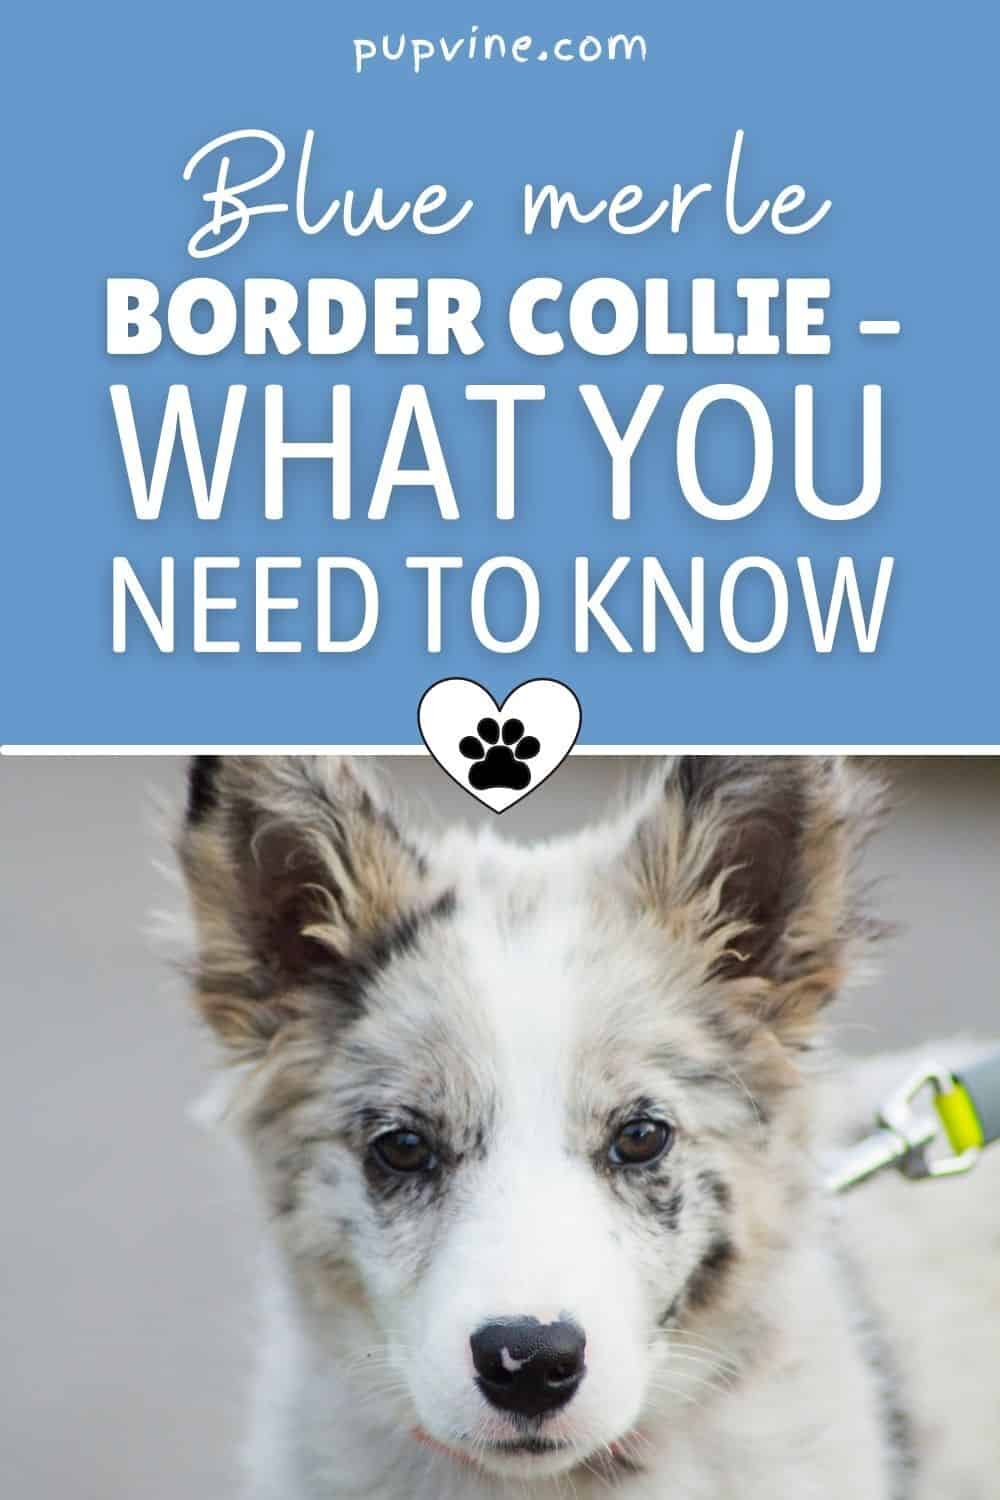 Blue Merle Border Collie – What You Need To Know